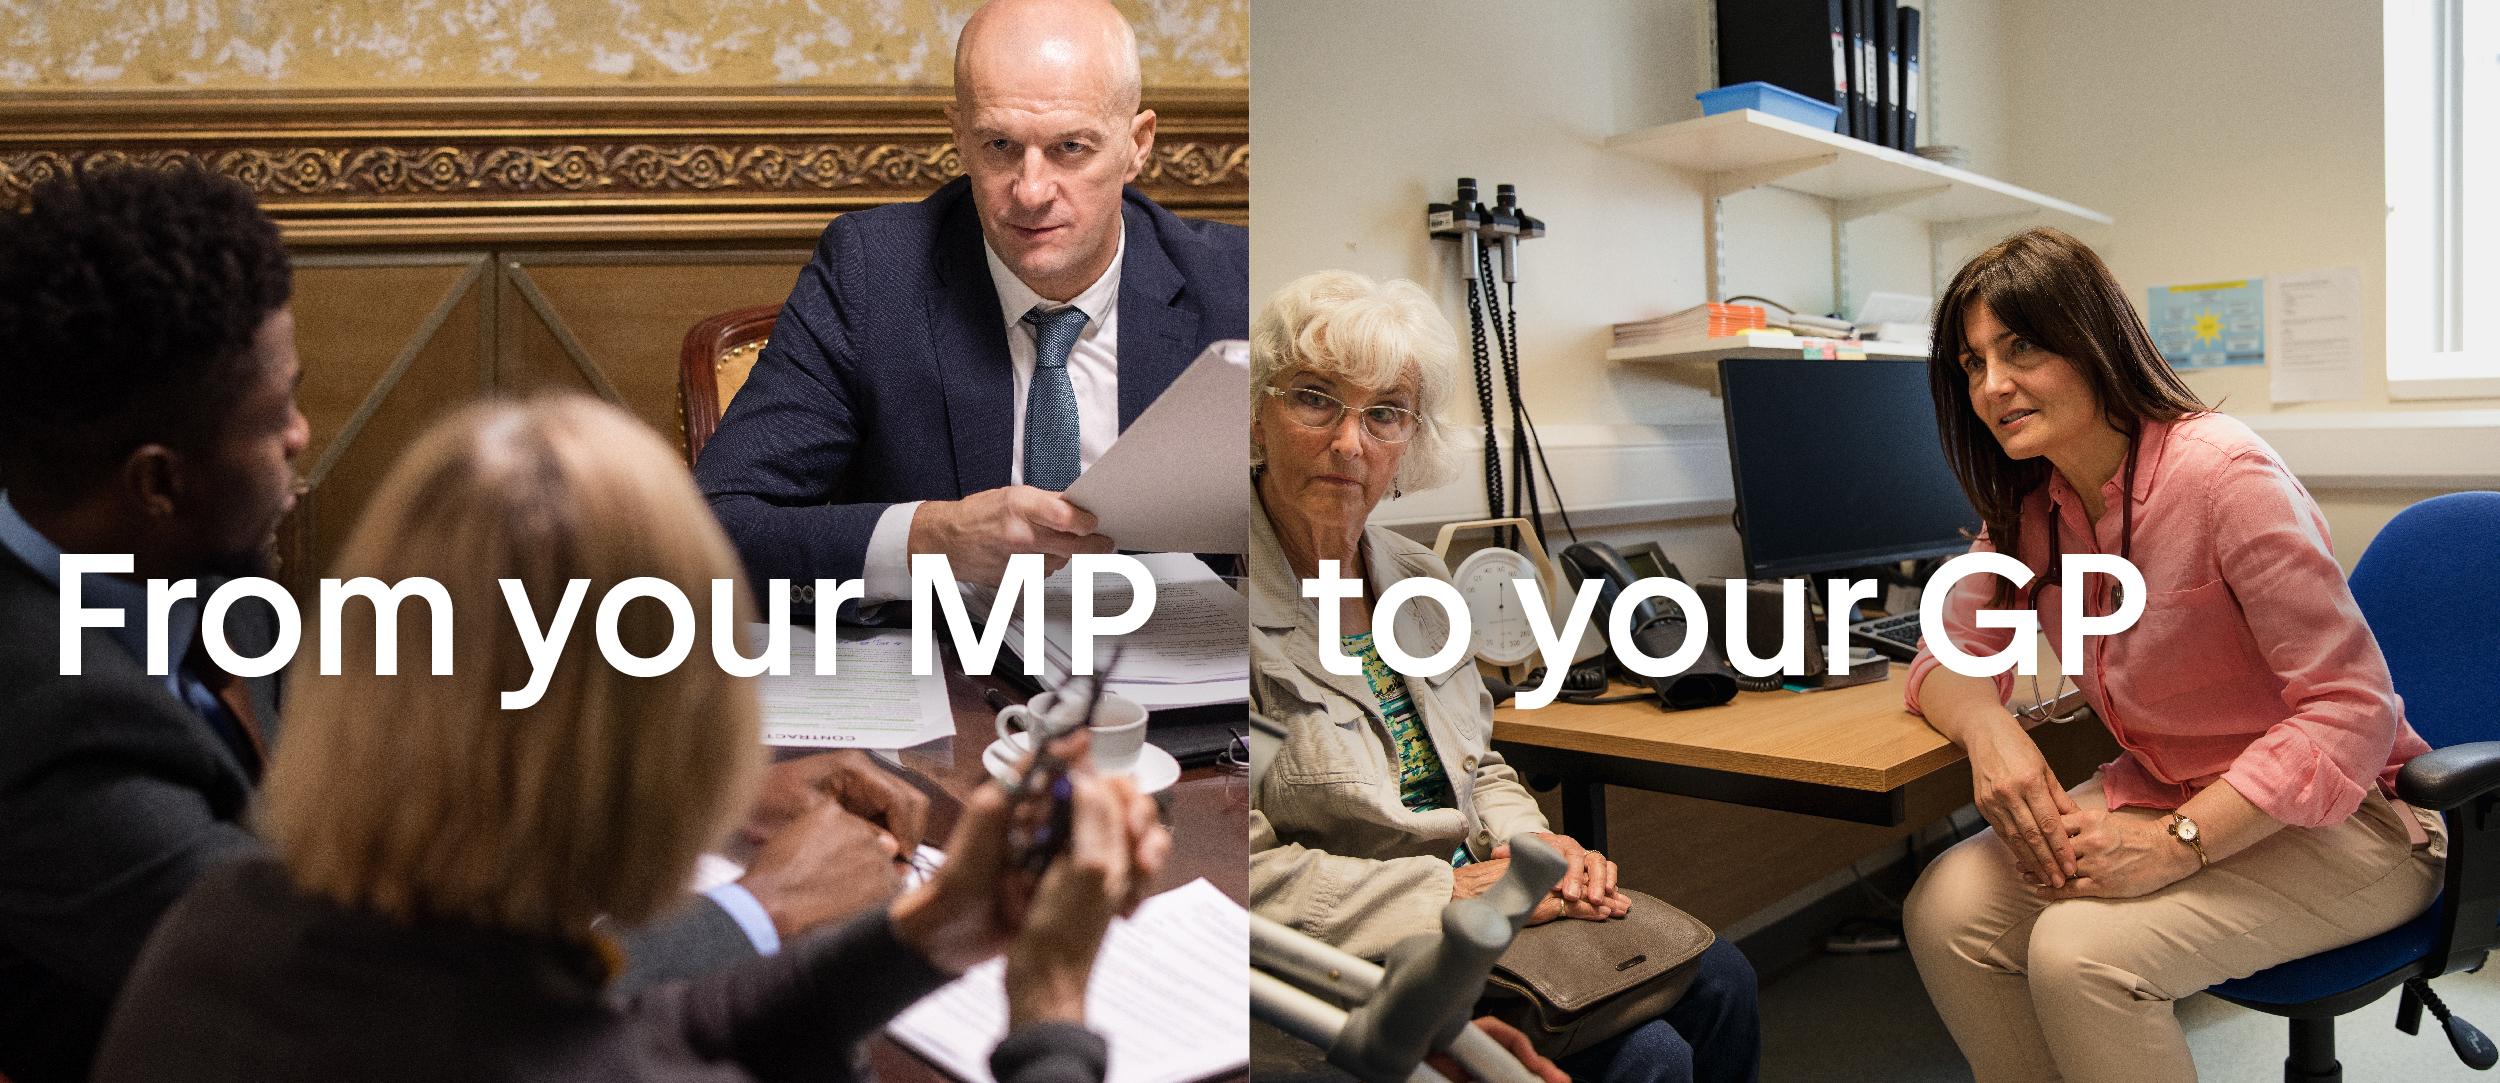 From your MP to your GP